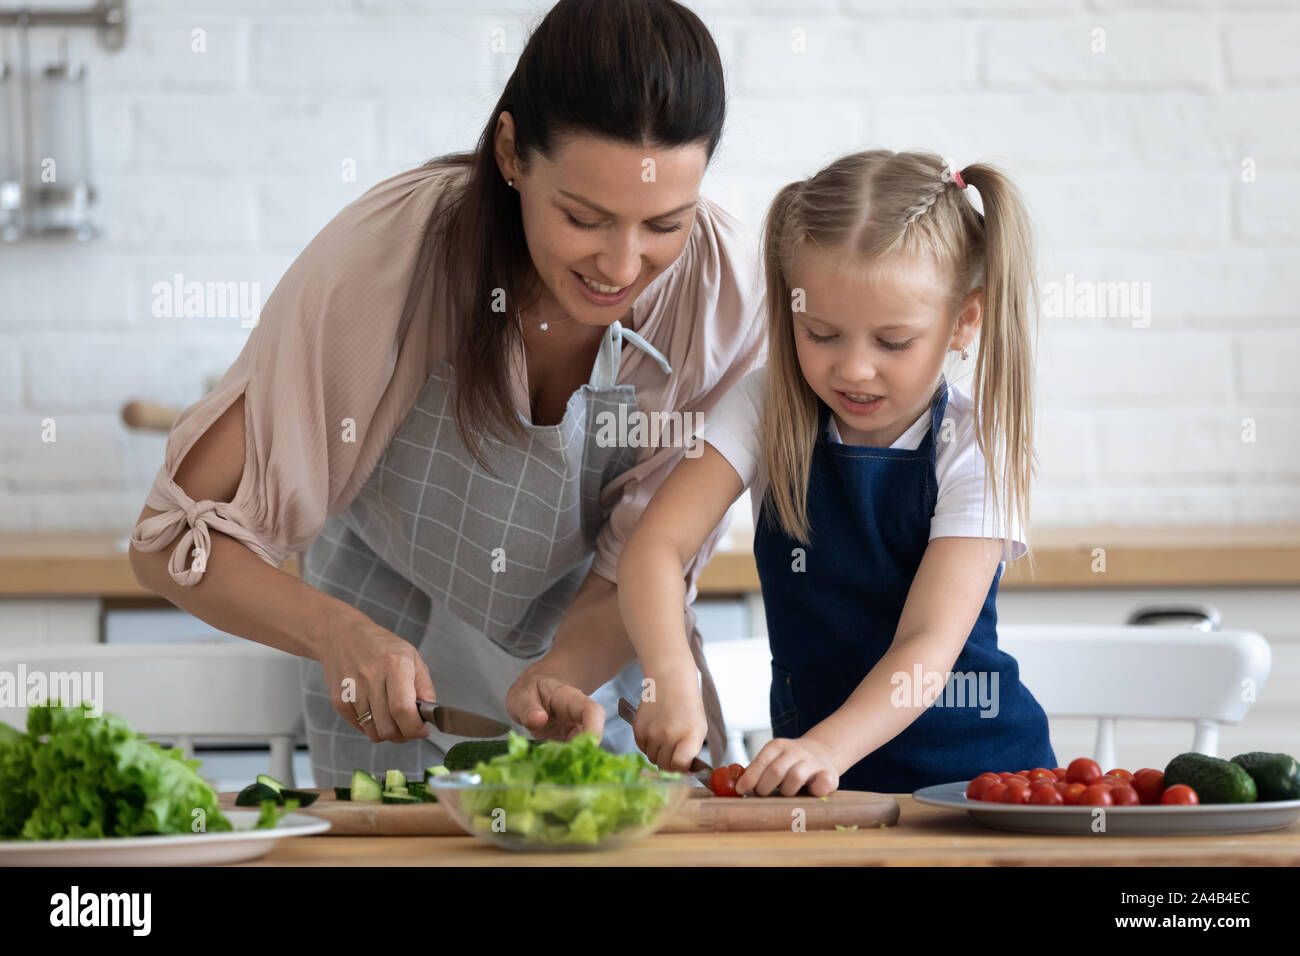 Caring mother teaching little daughter to cook salad Stock Photo